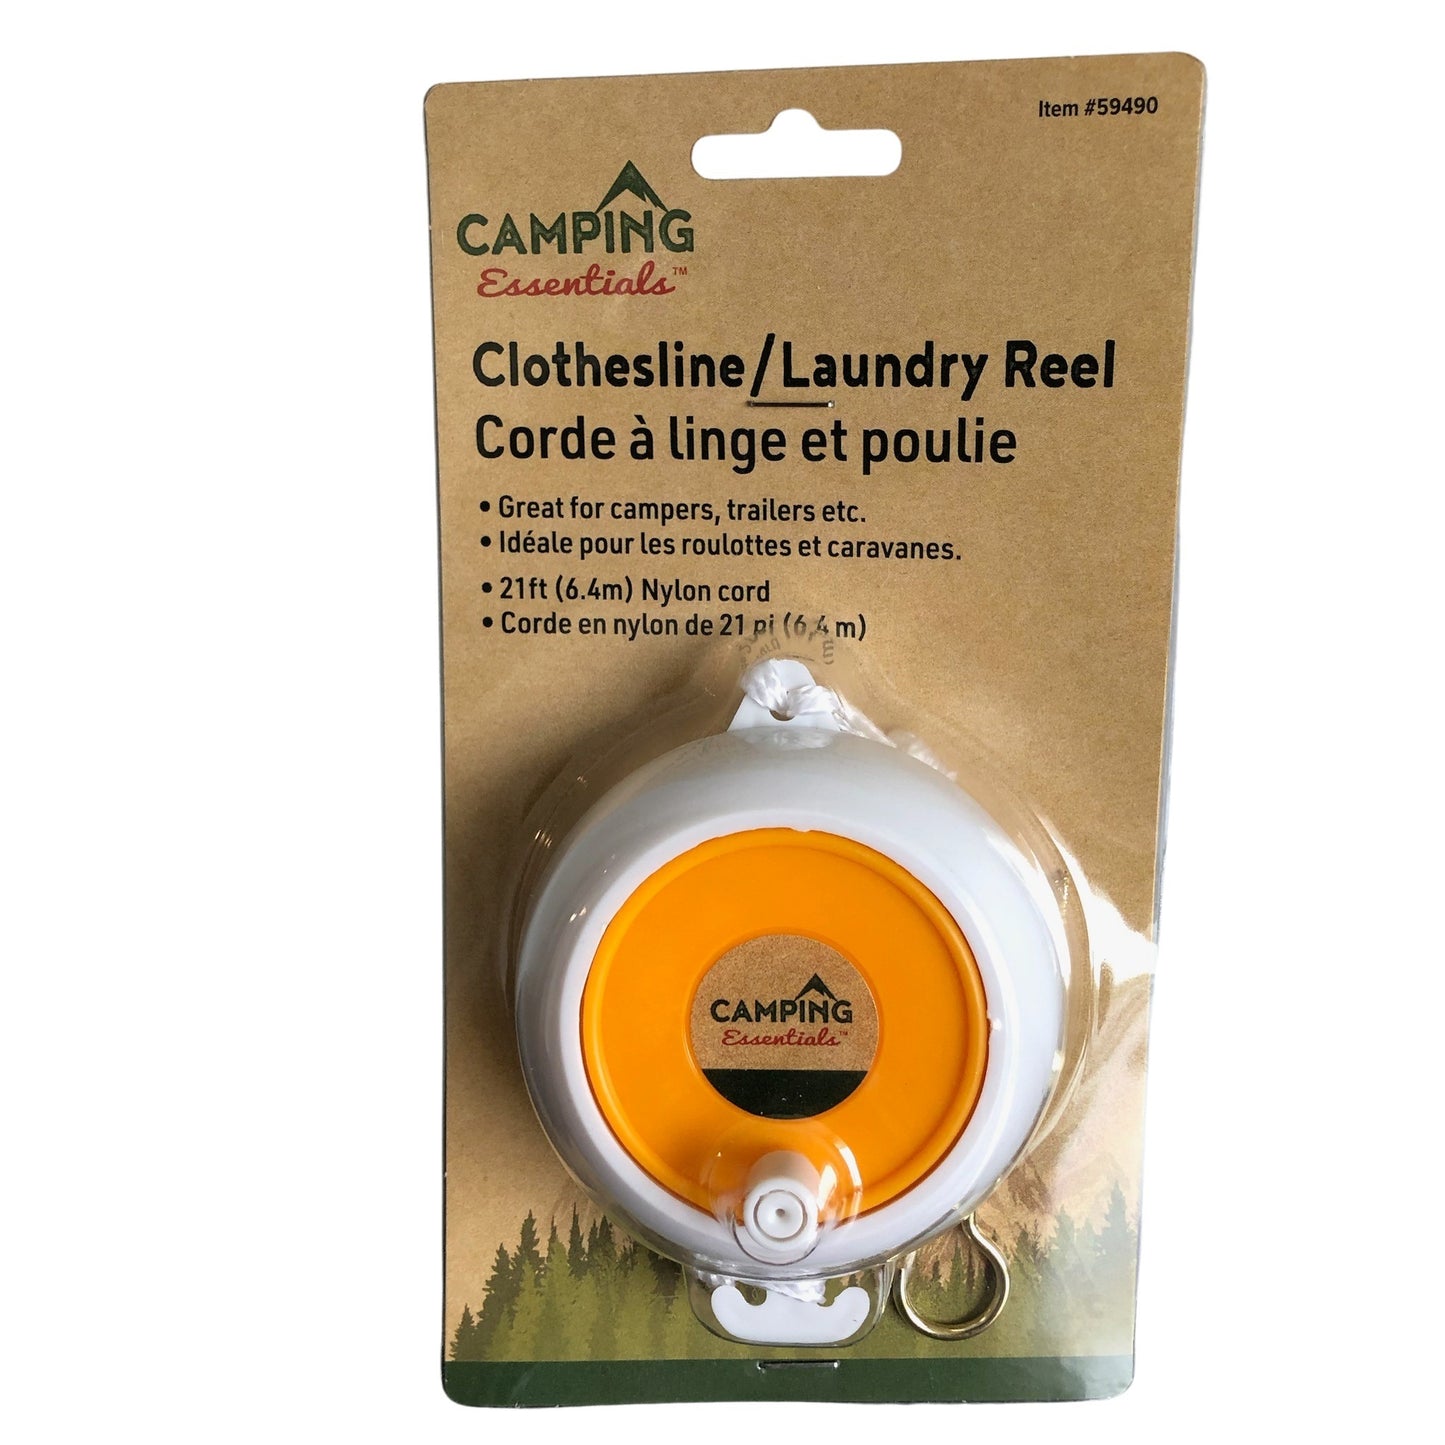 Camping Clothesline/Laundry Reel 59490